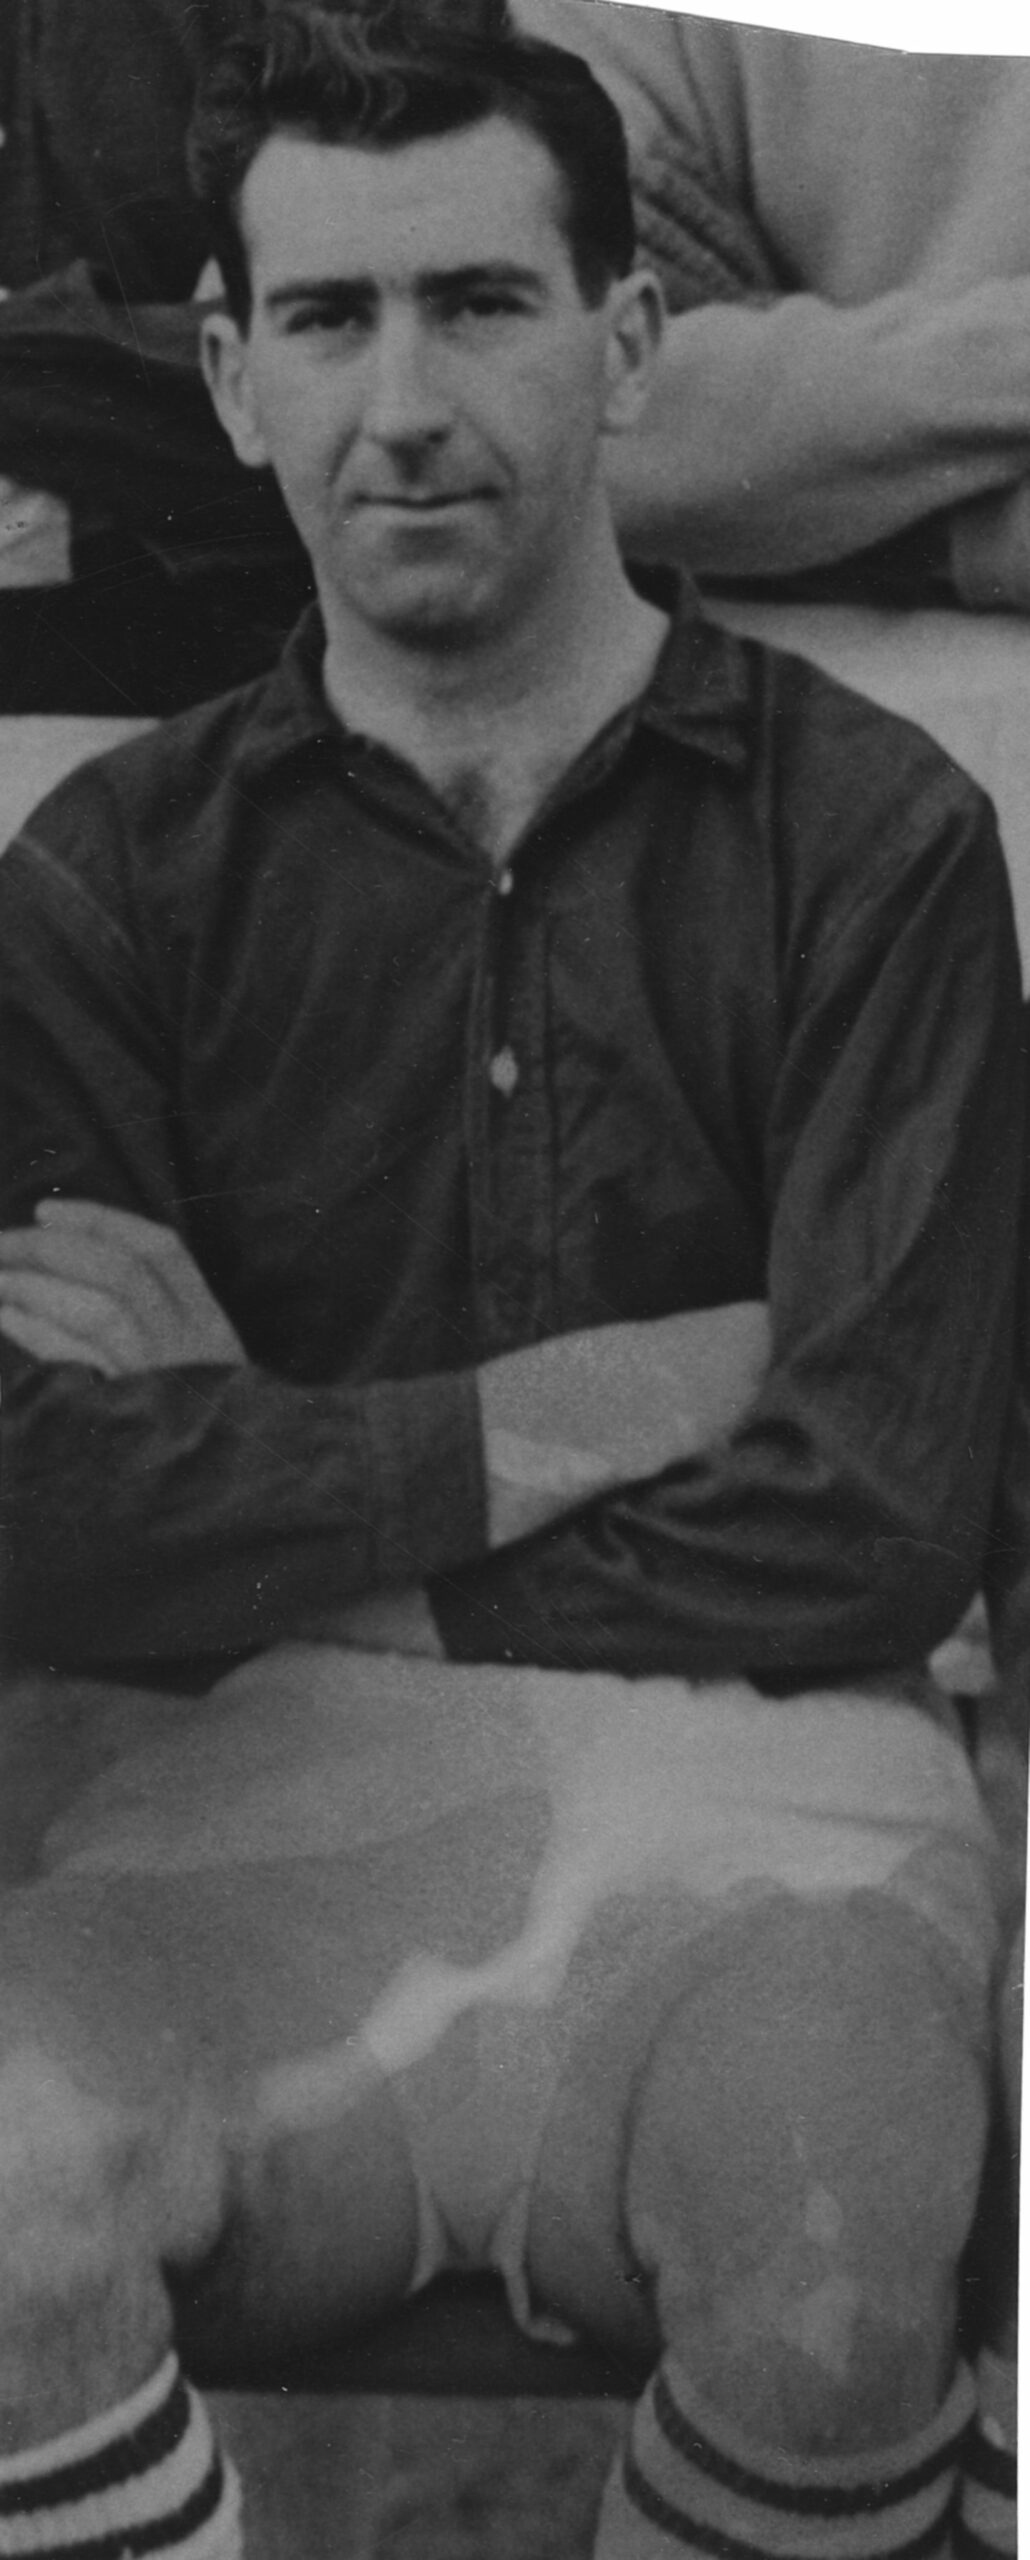 Football player George Kelly pictured in 1950.